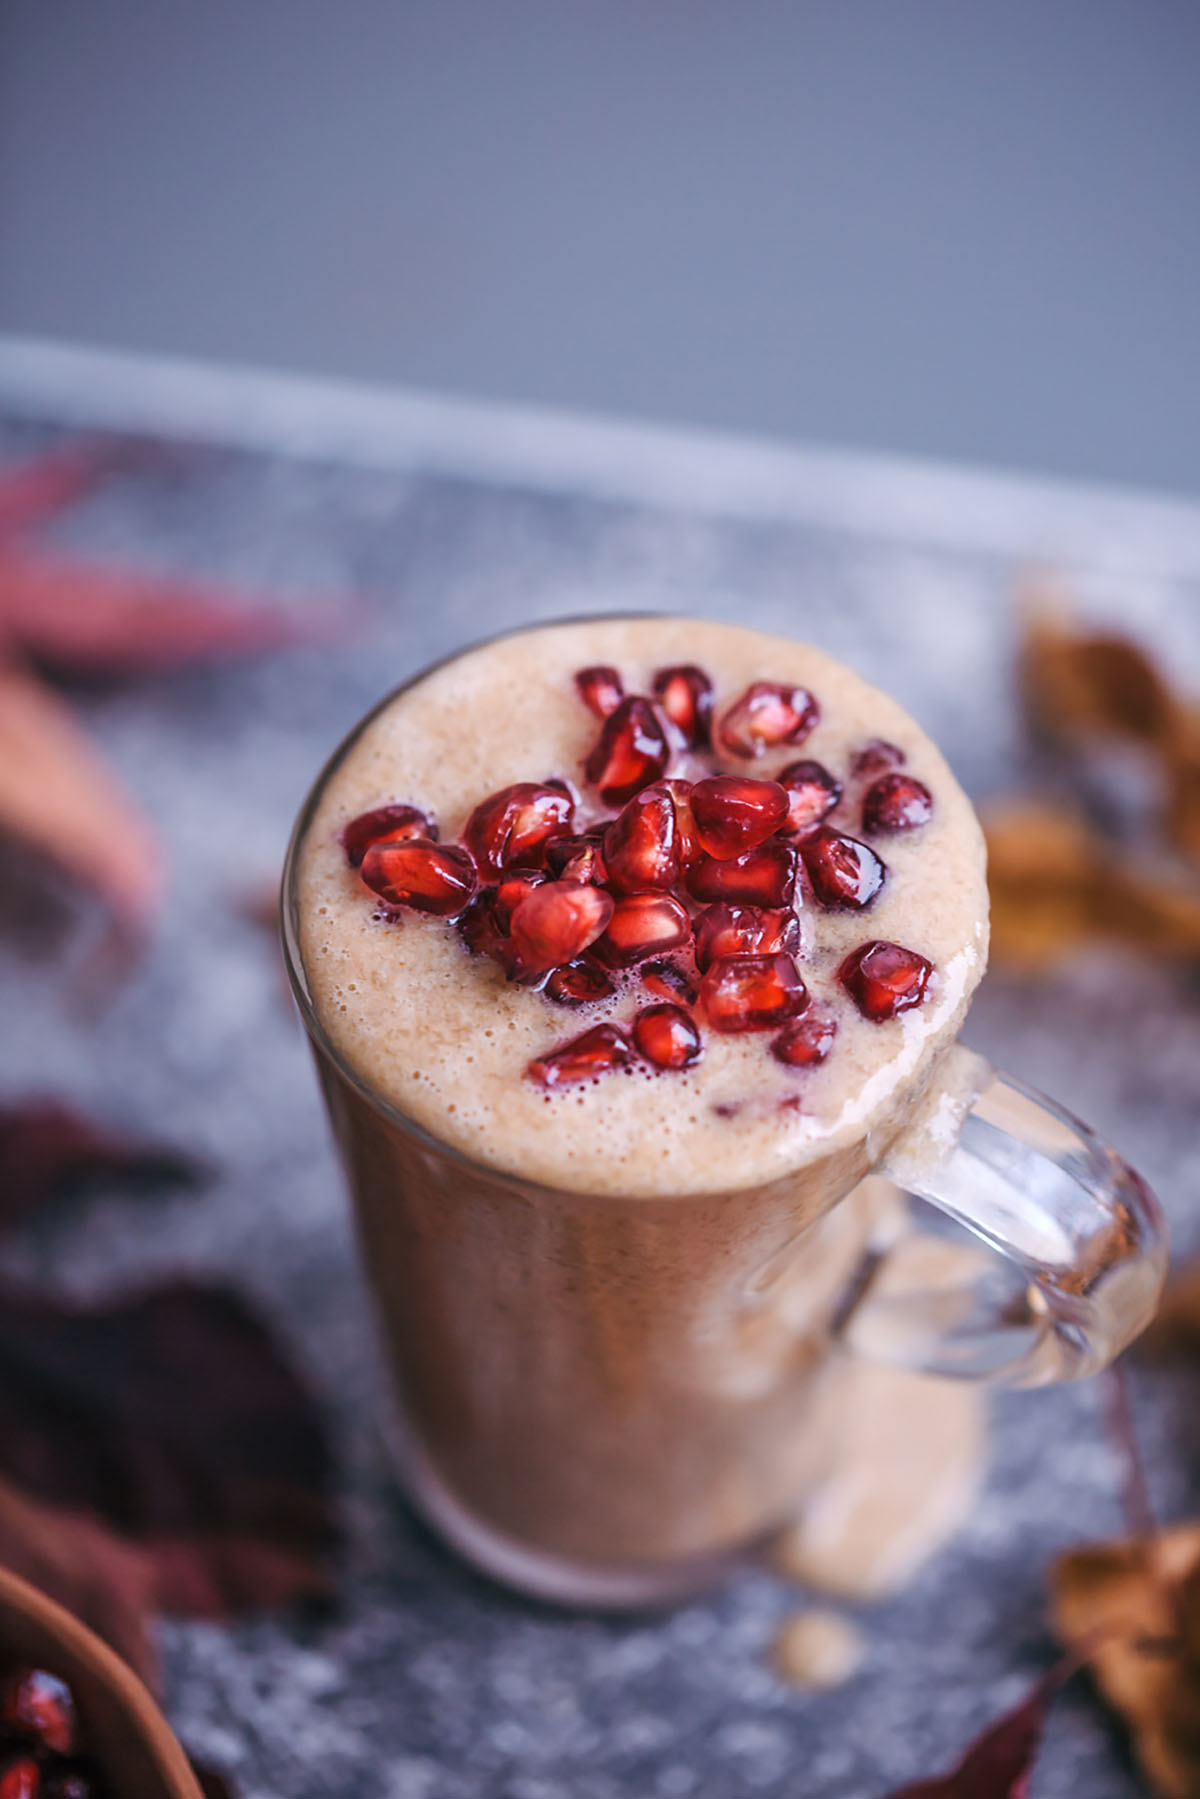 Banana almond butter smoothie (vegan and gluten-free)